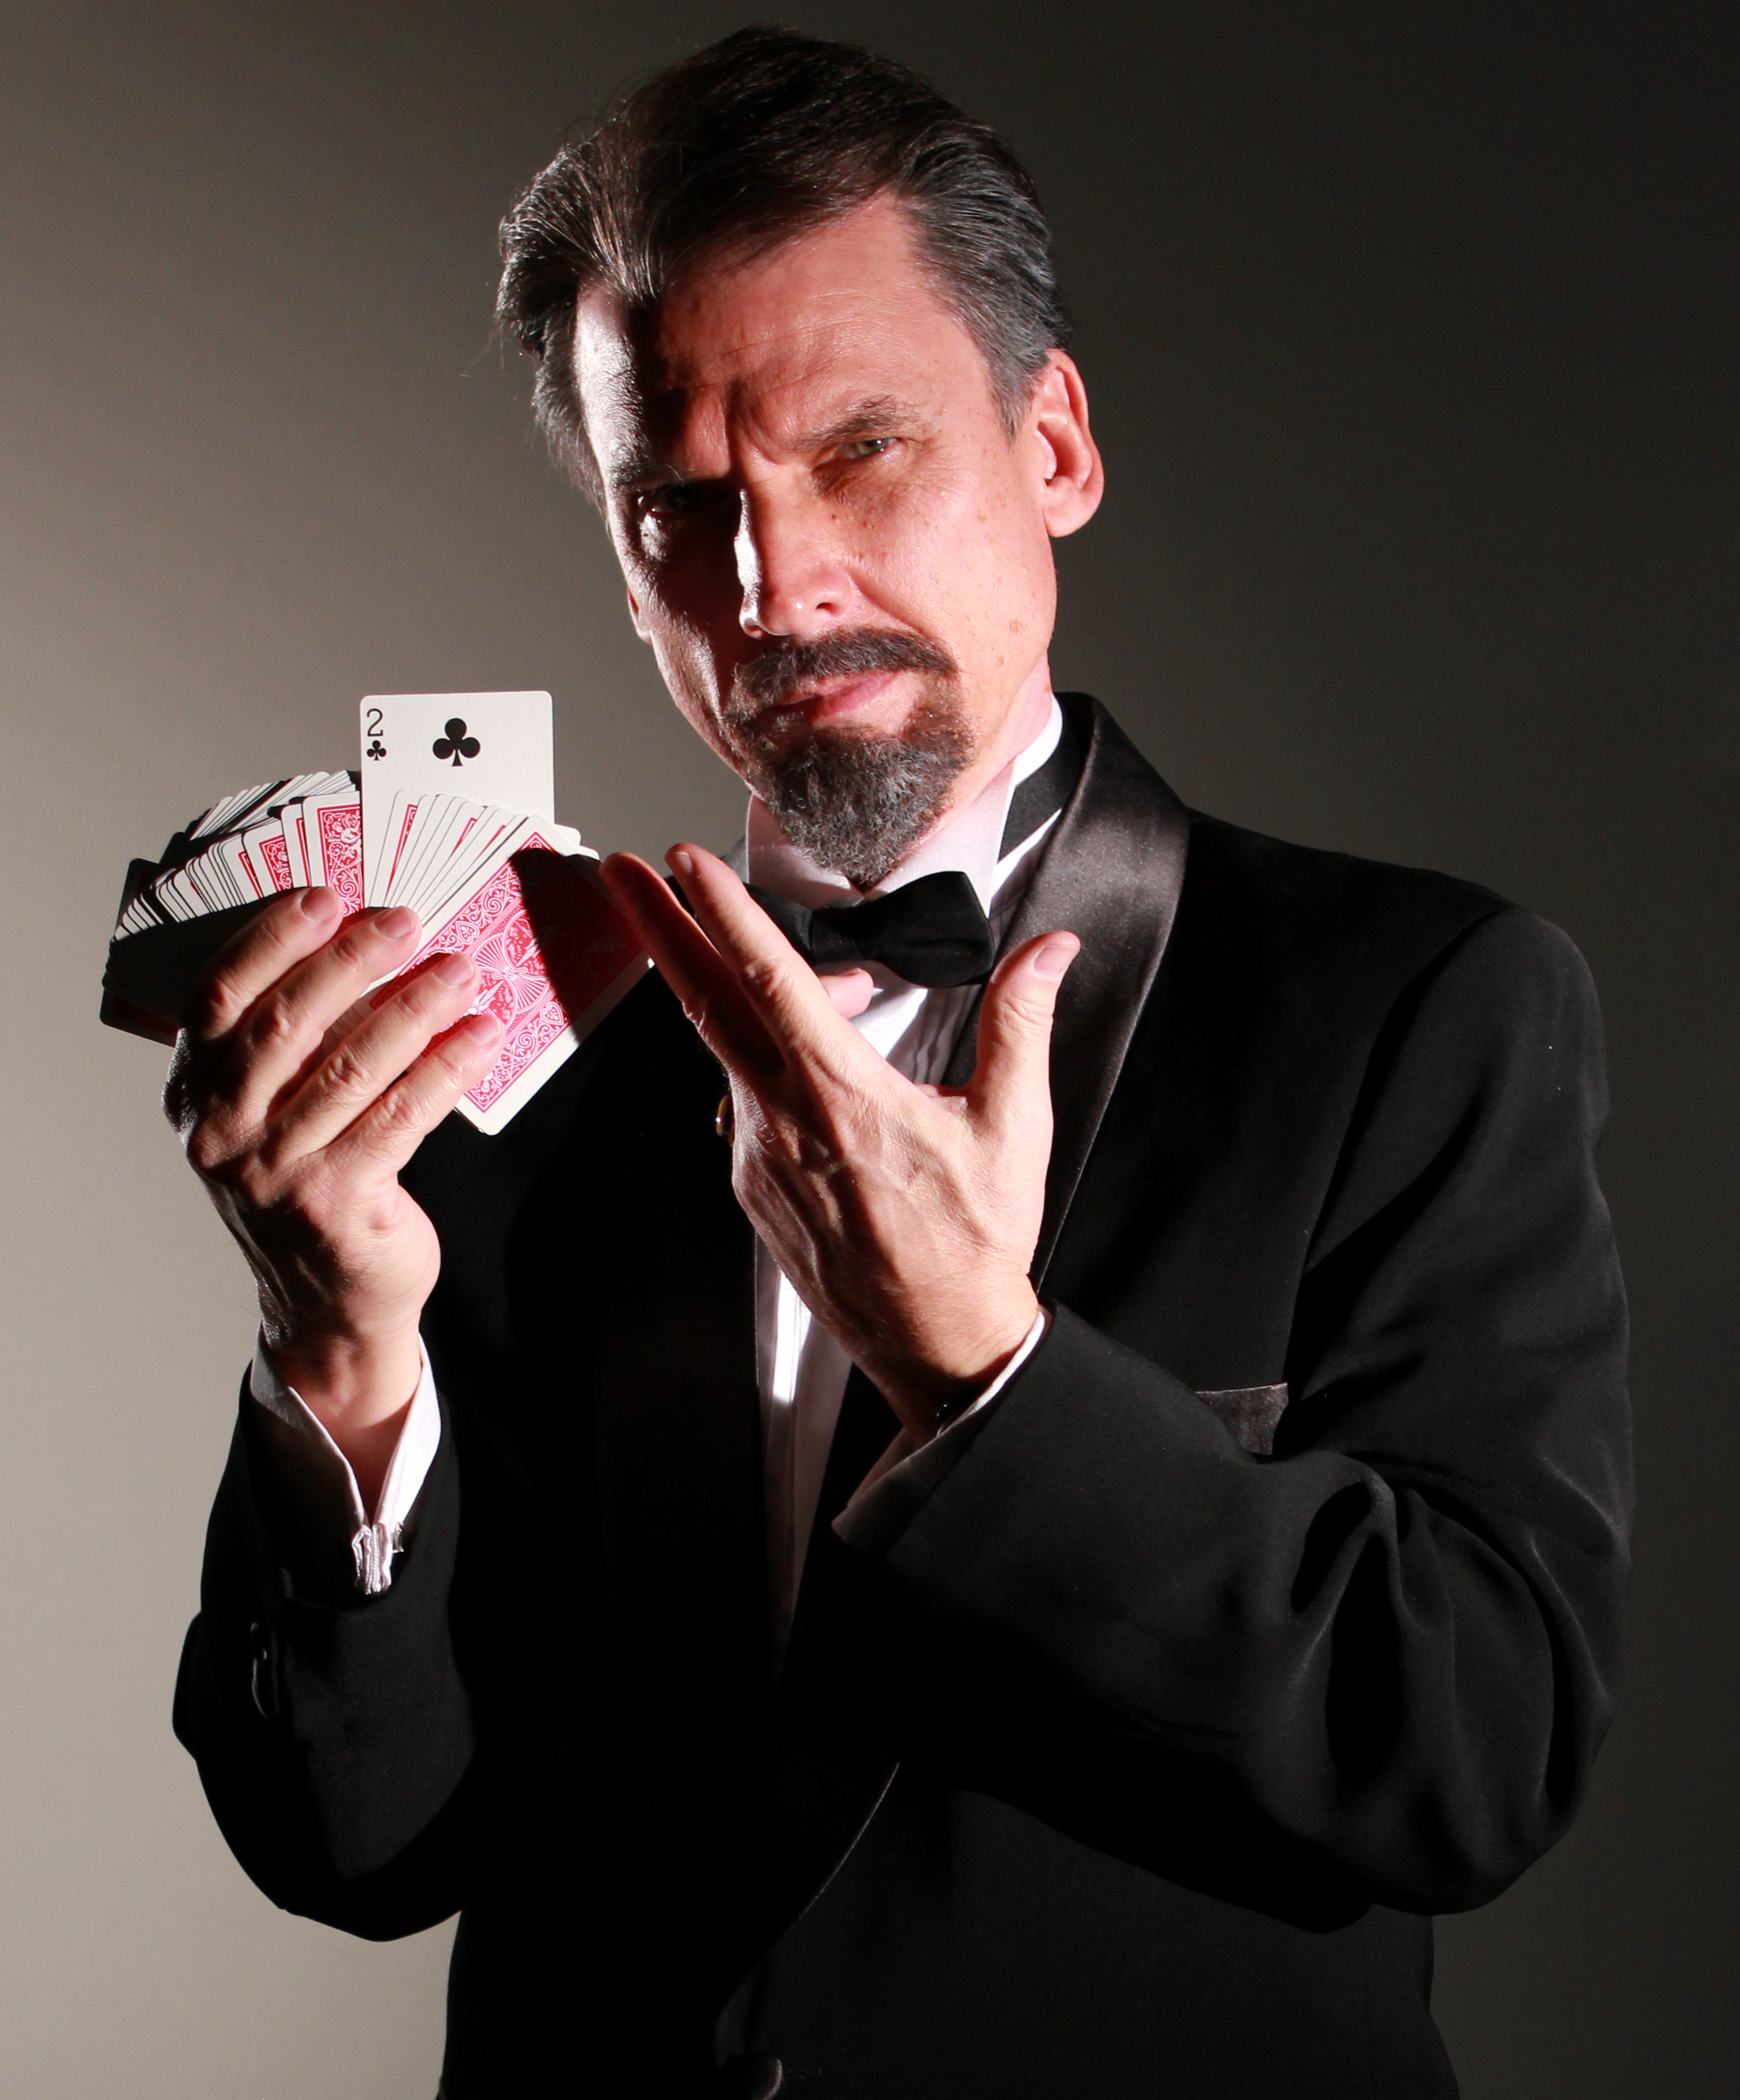 As Toby Murdock in Reality of Illusion